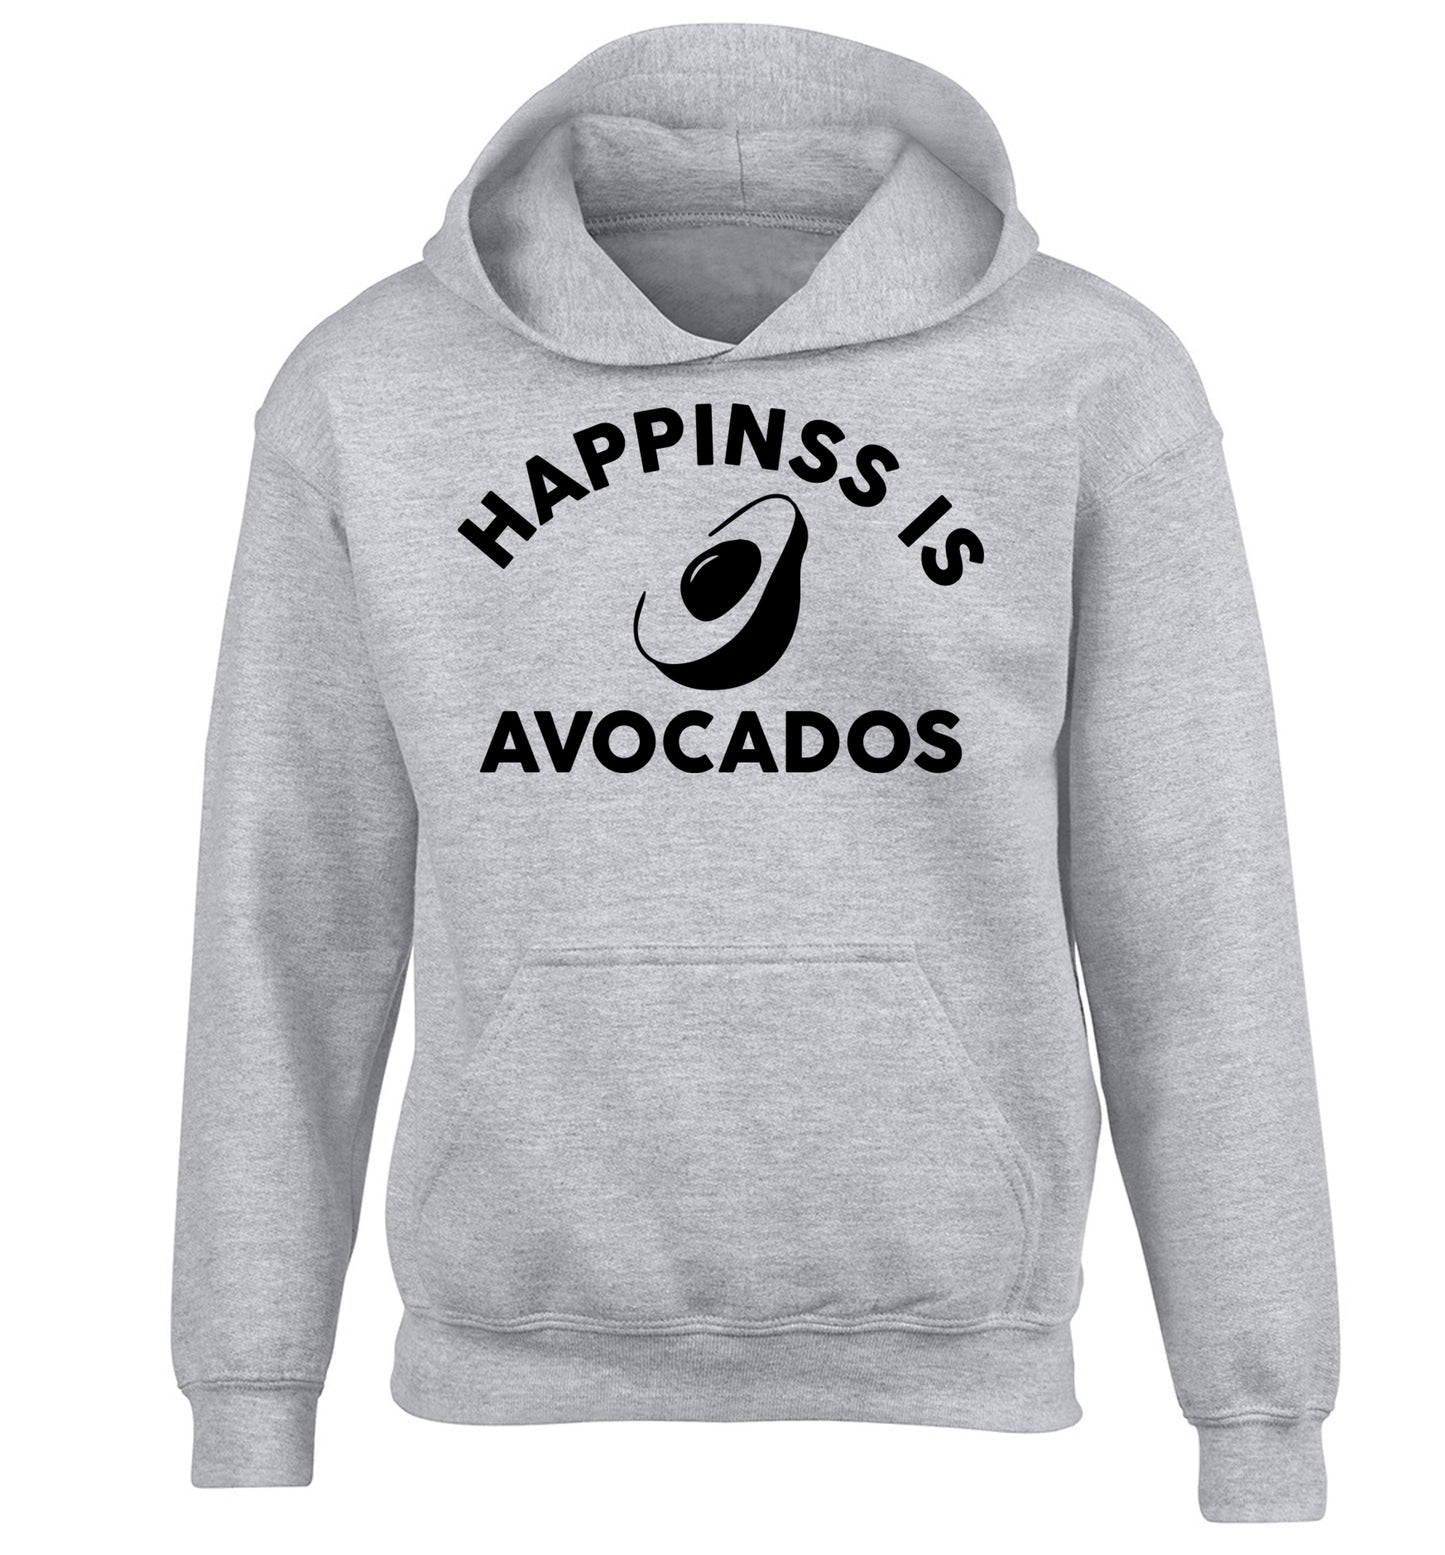 Happiness is avocados children's grey hoodie 12-14 Years